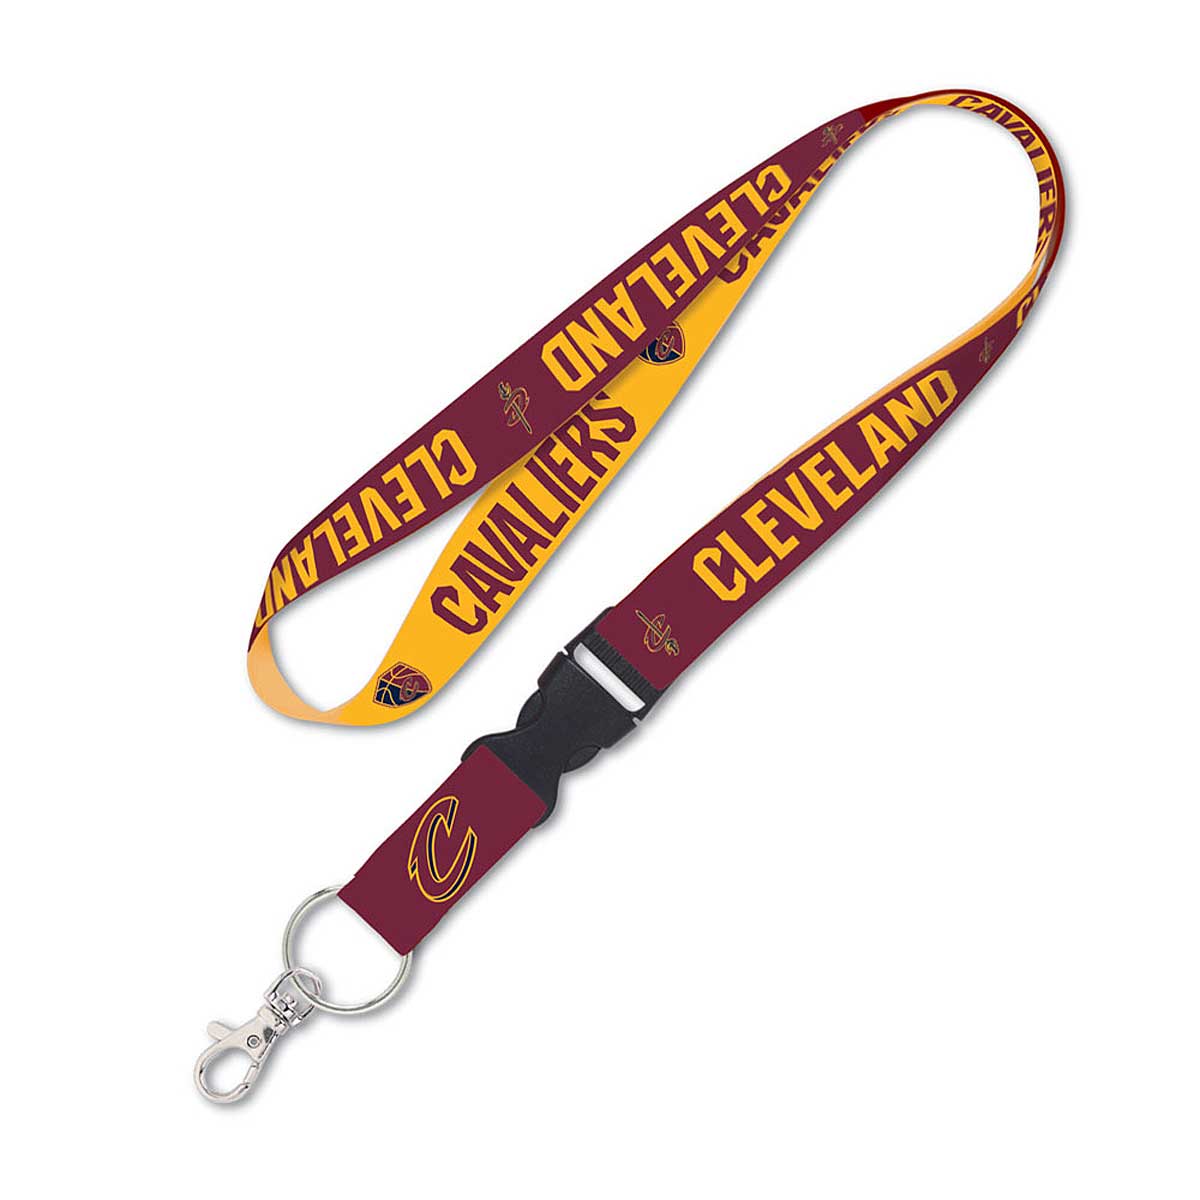 Wincraft Nba Keychain Long Cleveland Cavaliers, Cavaliers Red